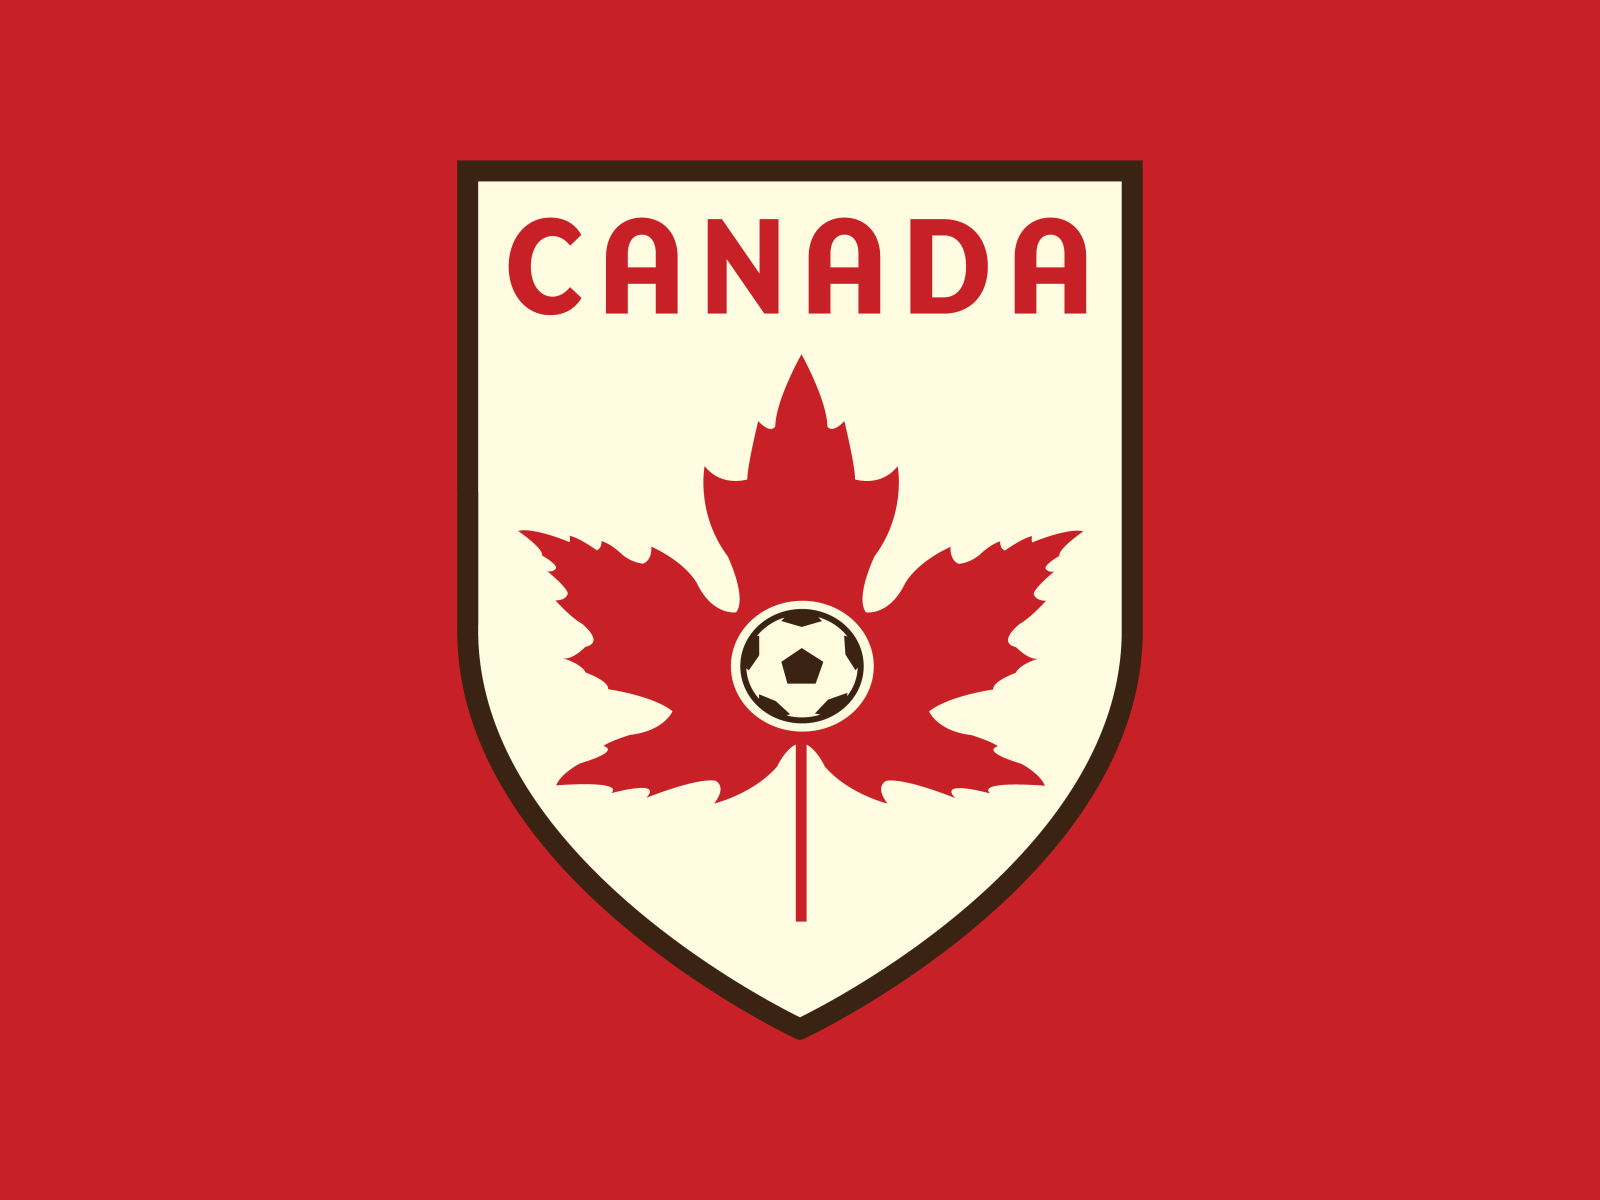 Canada National Soccer Team Conceptual Rebrand By Kenion Harvey On Dribbble